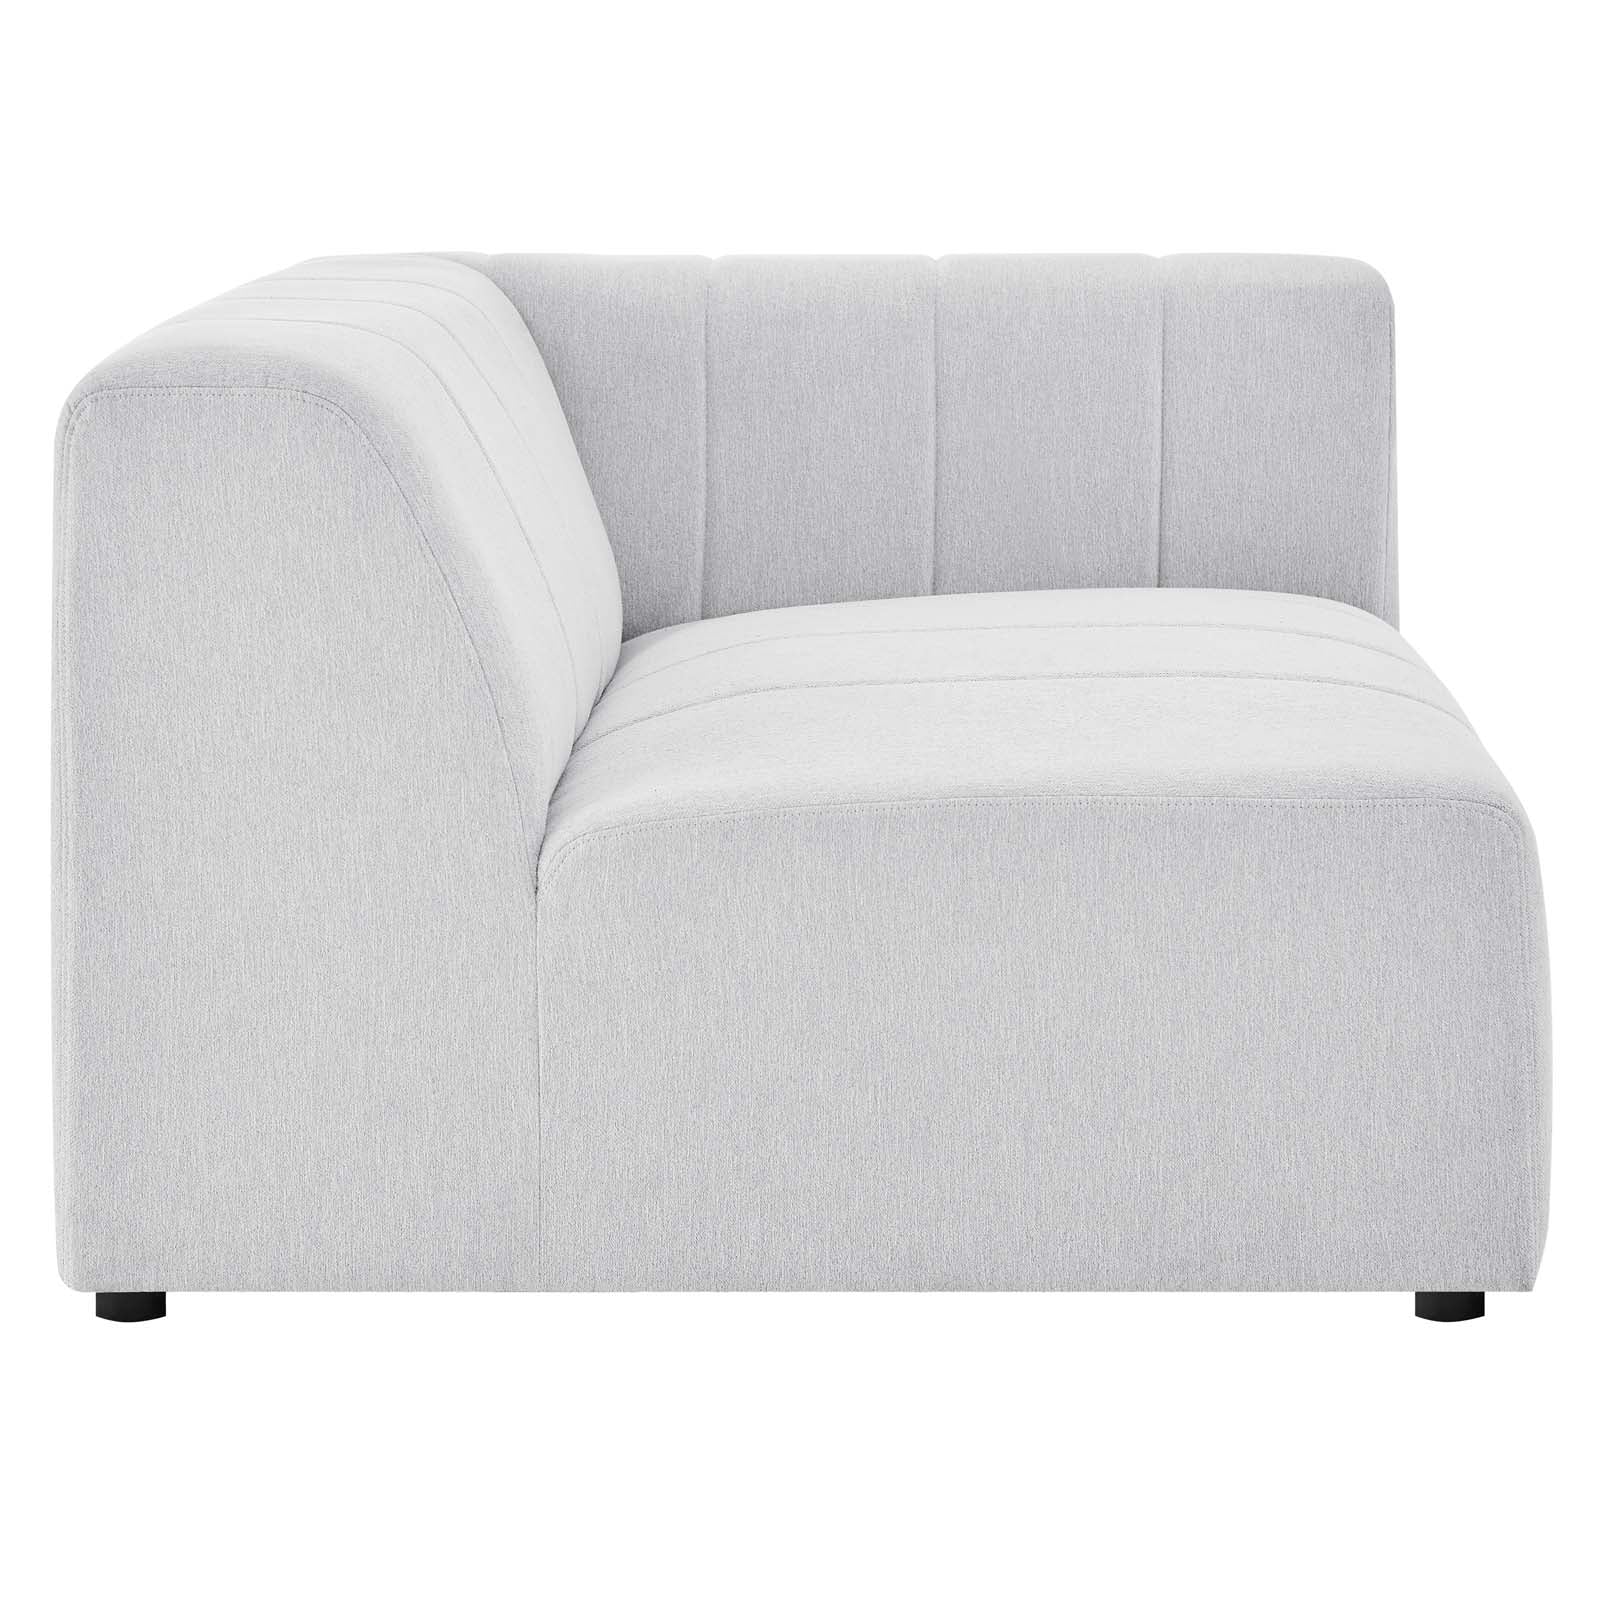 Modway Sectional Sofas - Bartlett Upholstered Fabric 6-Piece Sectional Sofa Ivory